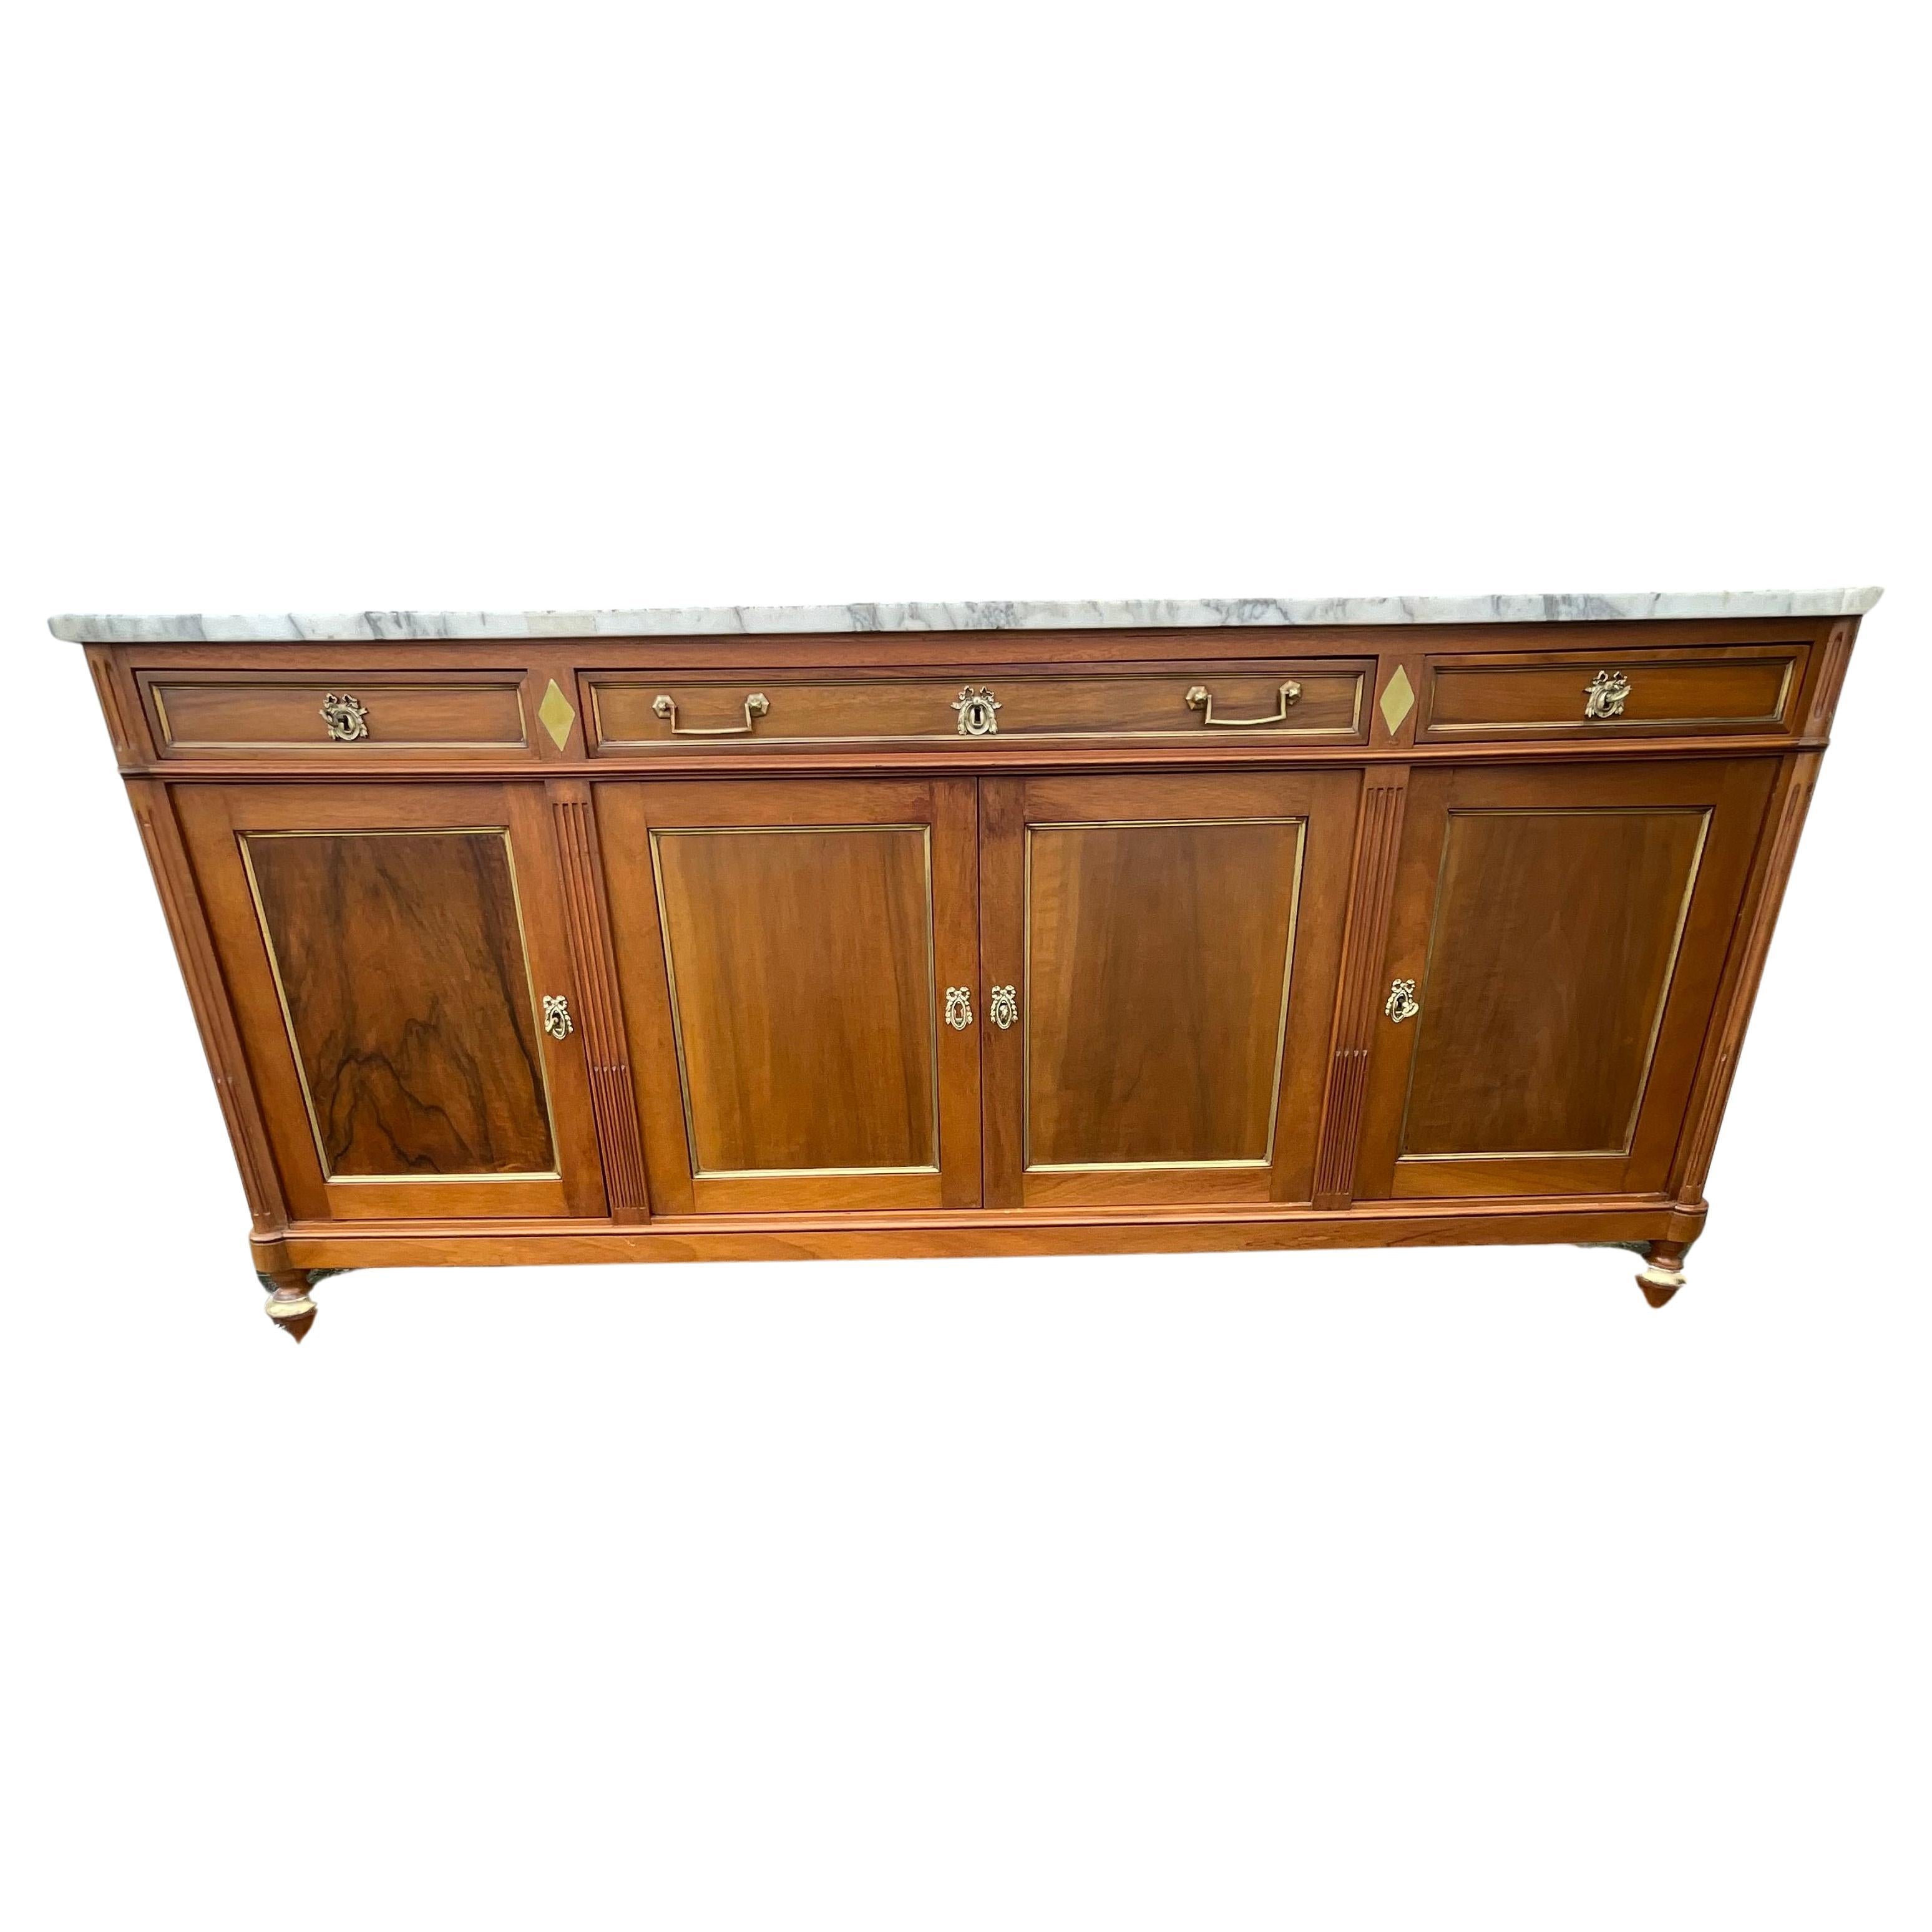 French Louis XVI Style Sideboard Early 20th Century In Walnut For Sale